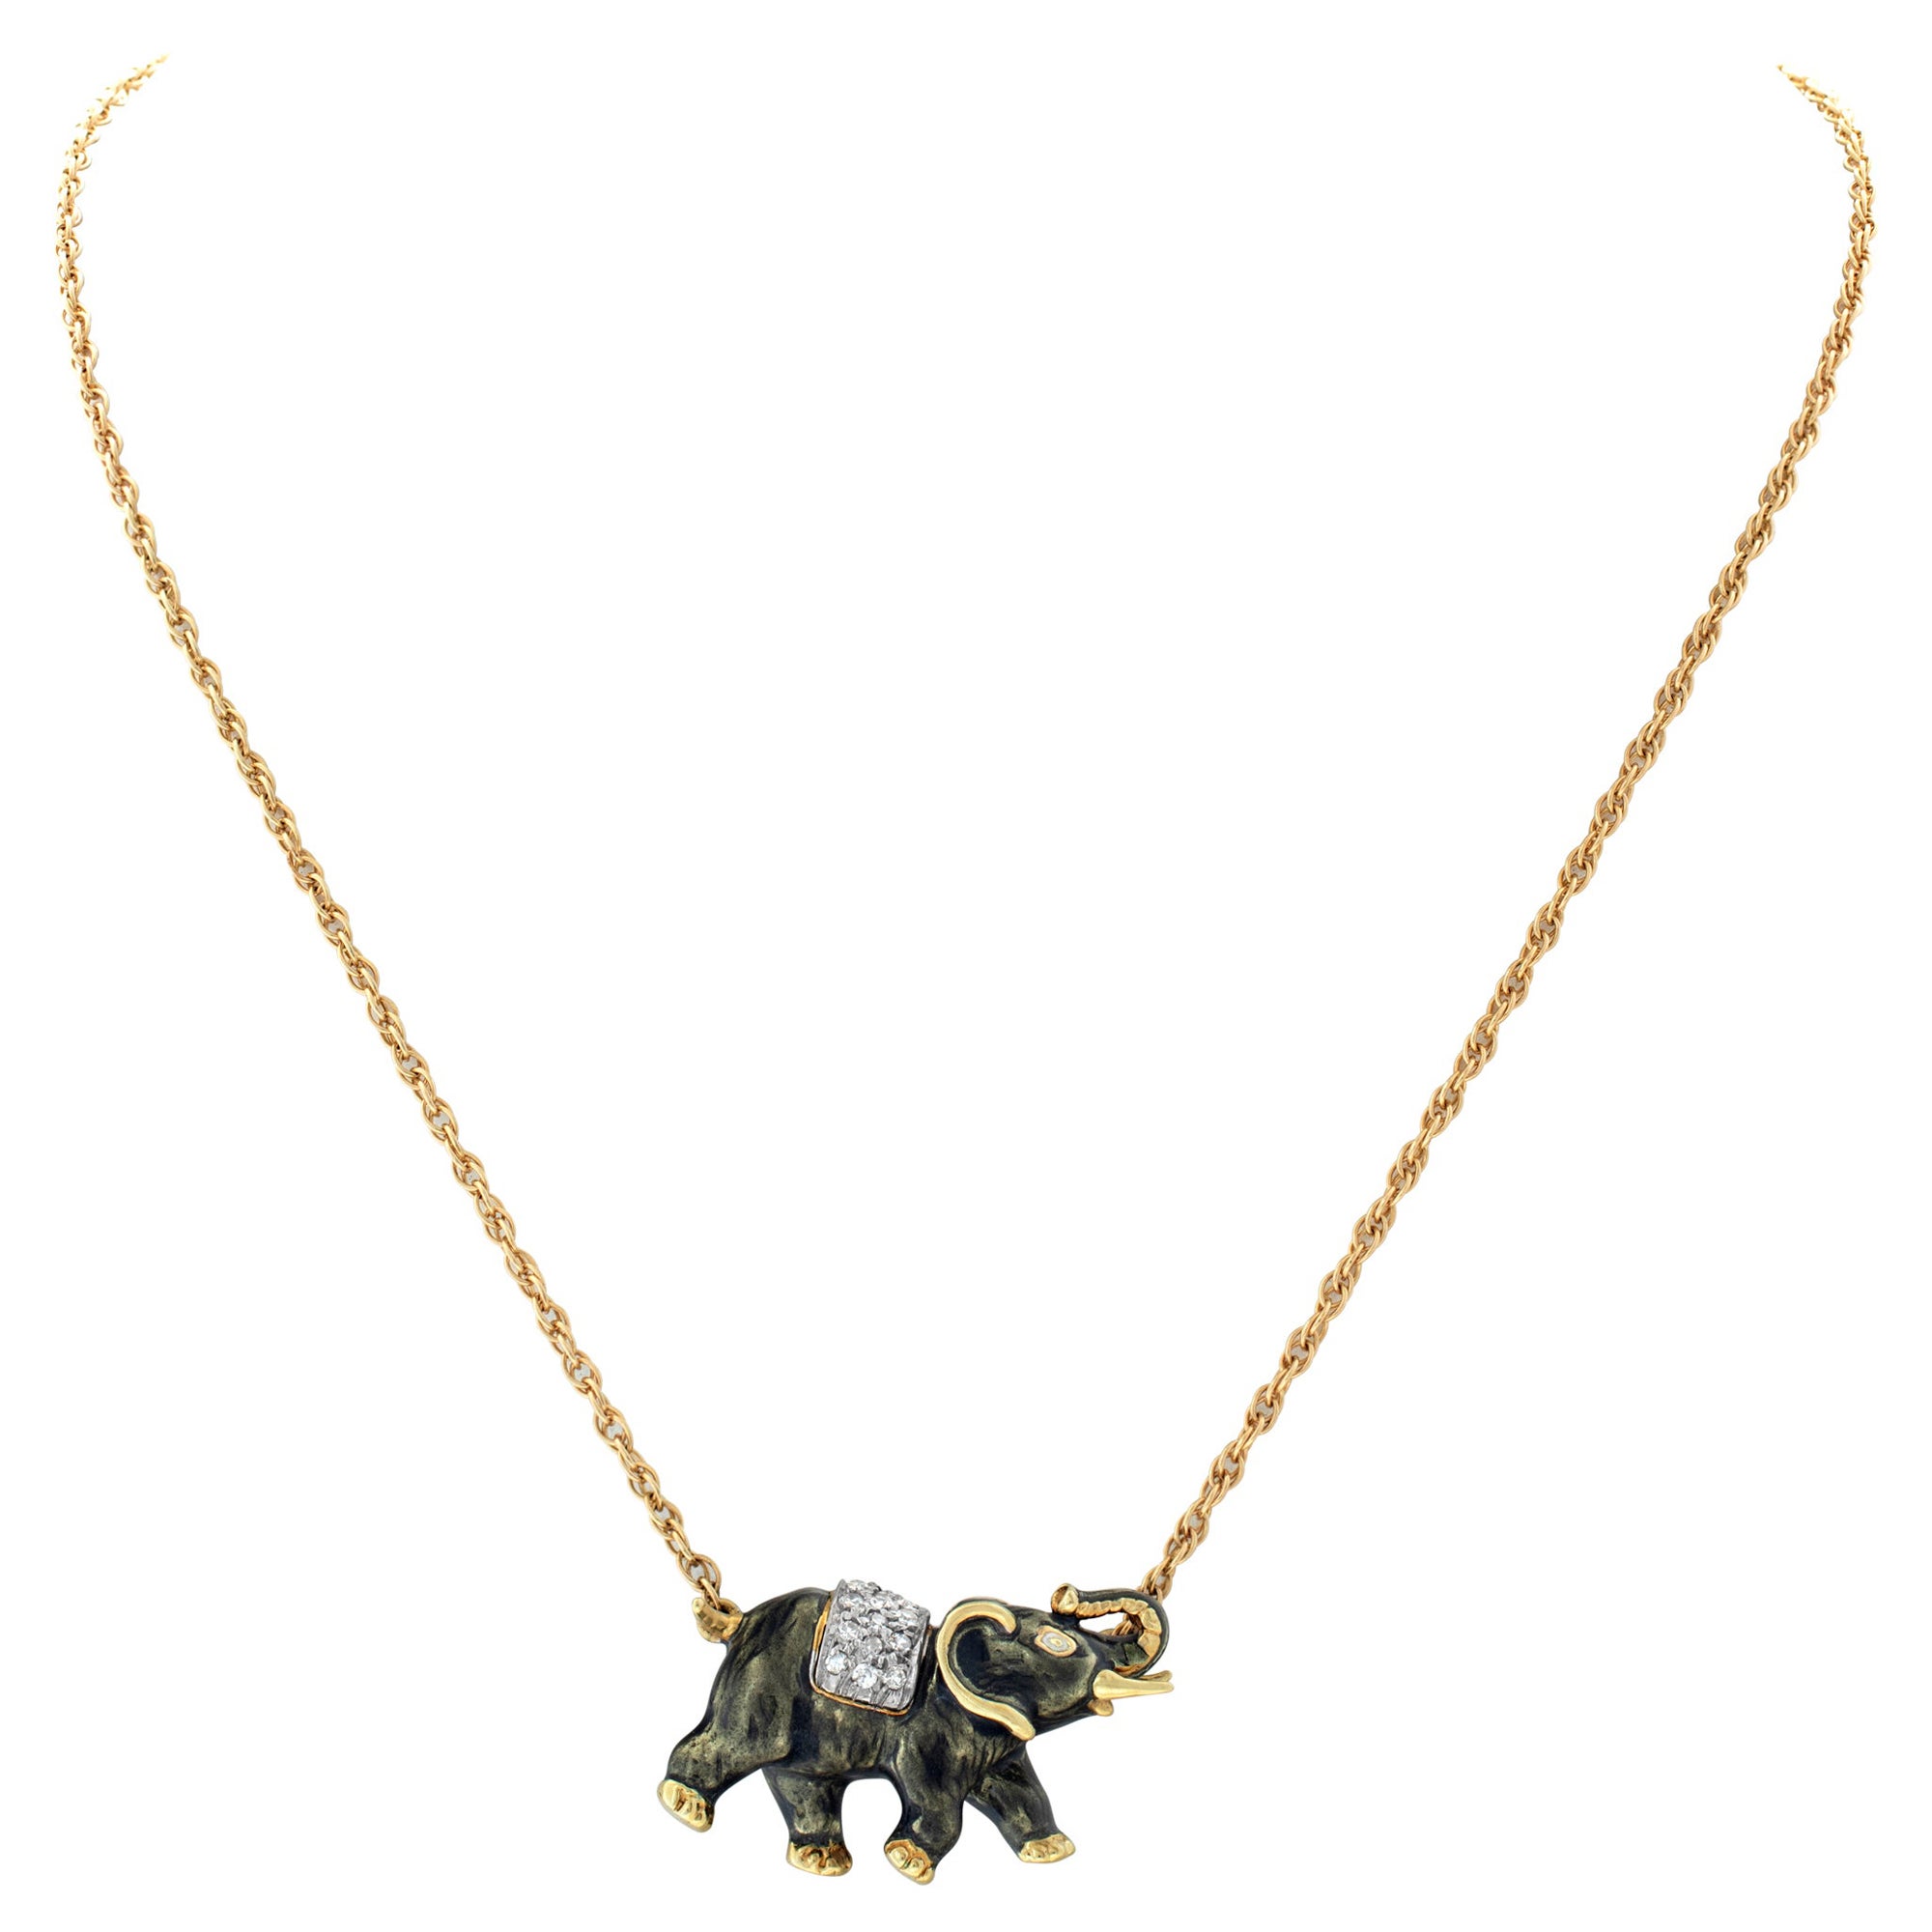 Elephant necklace in 14k gold with 0.25 carats in diamond accents G-H color For Sale